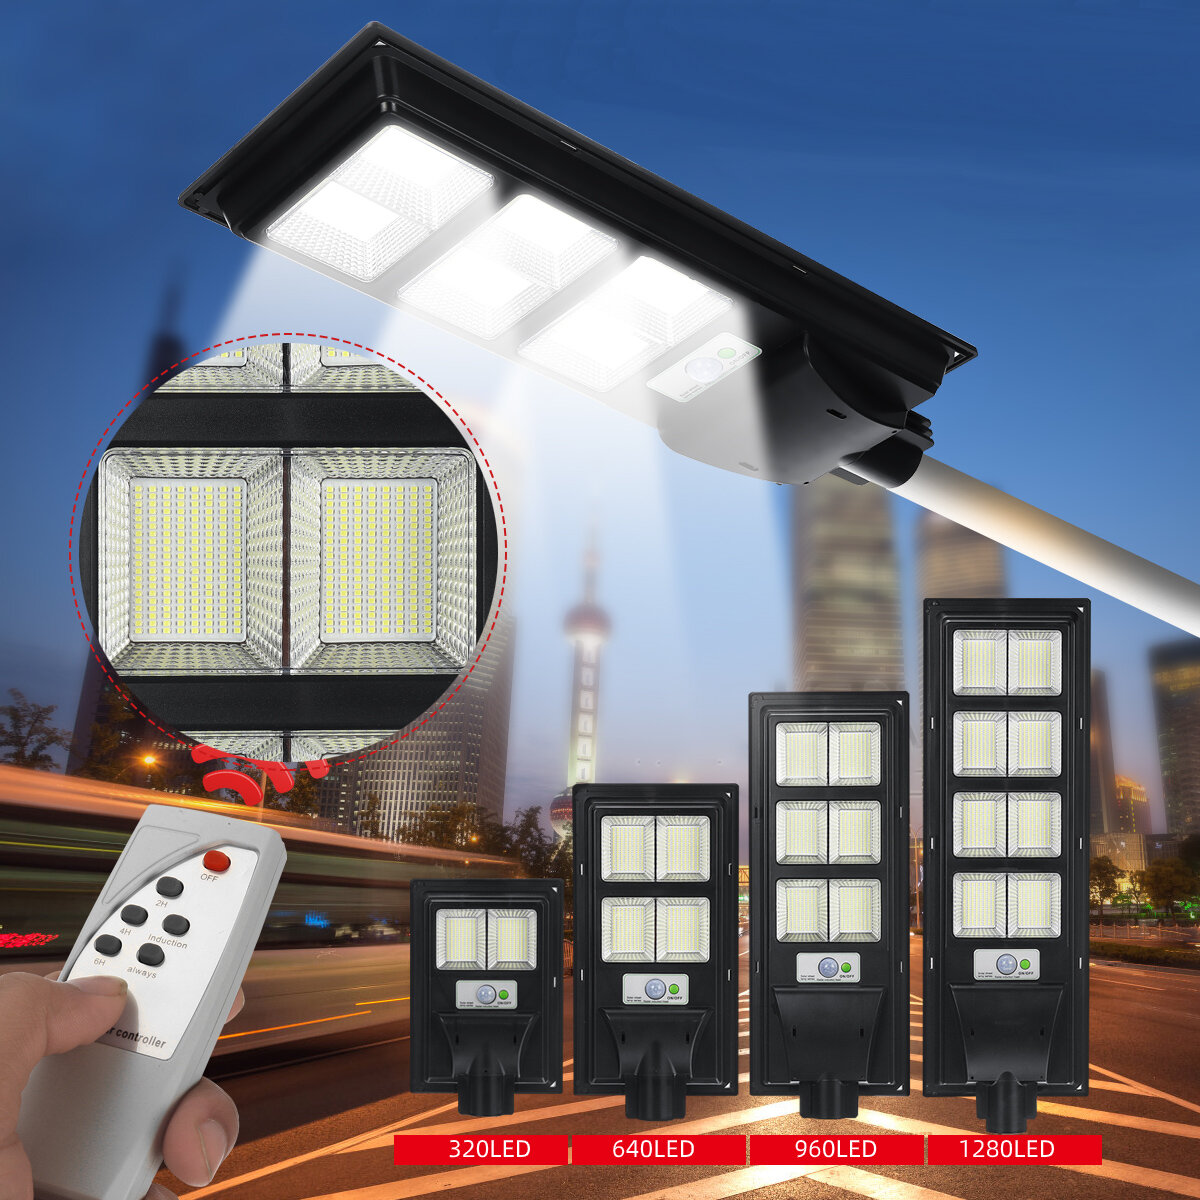 Image of 320/640/960/1280LED Solar Powered Street Light Garden Wall Lamp Timing Control